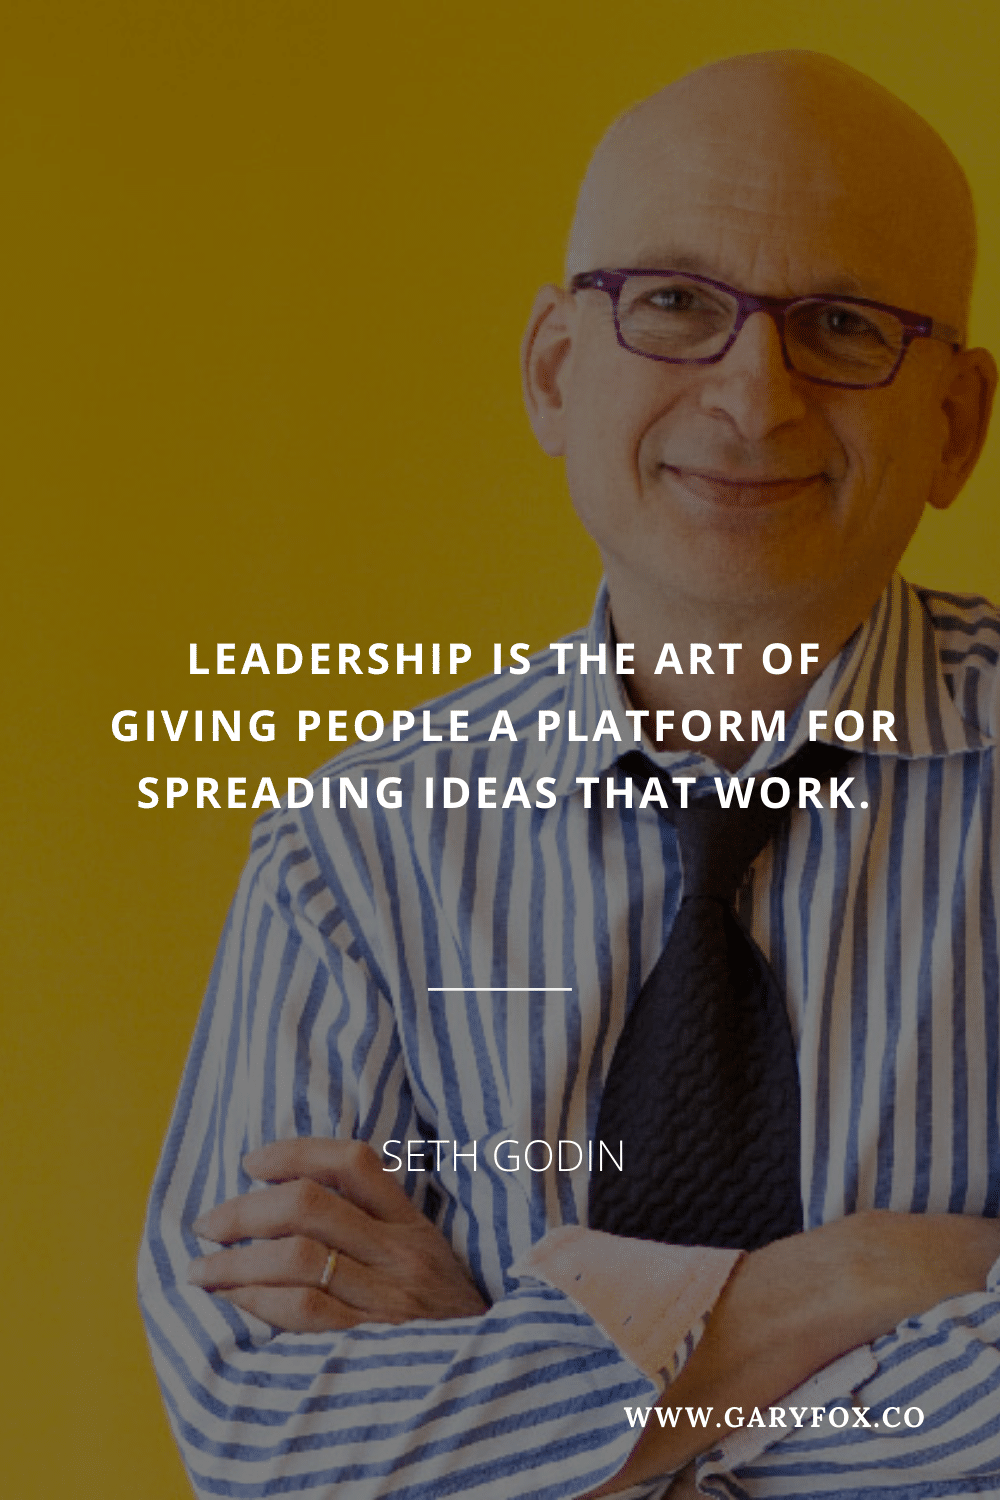 Leadership Is The Art Of Giving People A Platform For Spreading Ideas That Work. - Seth Godin